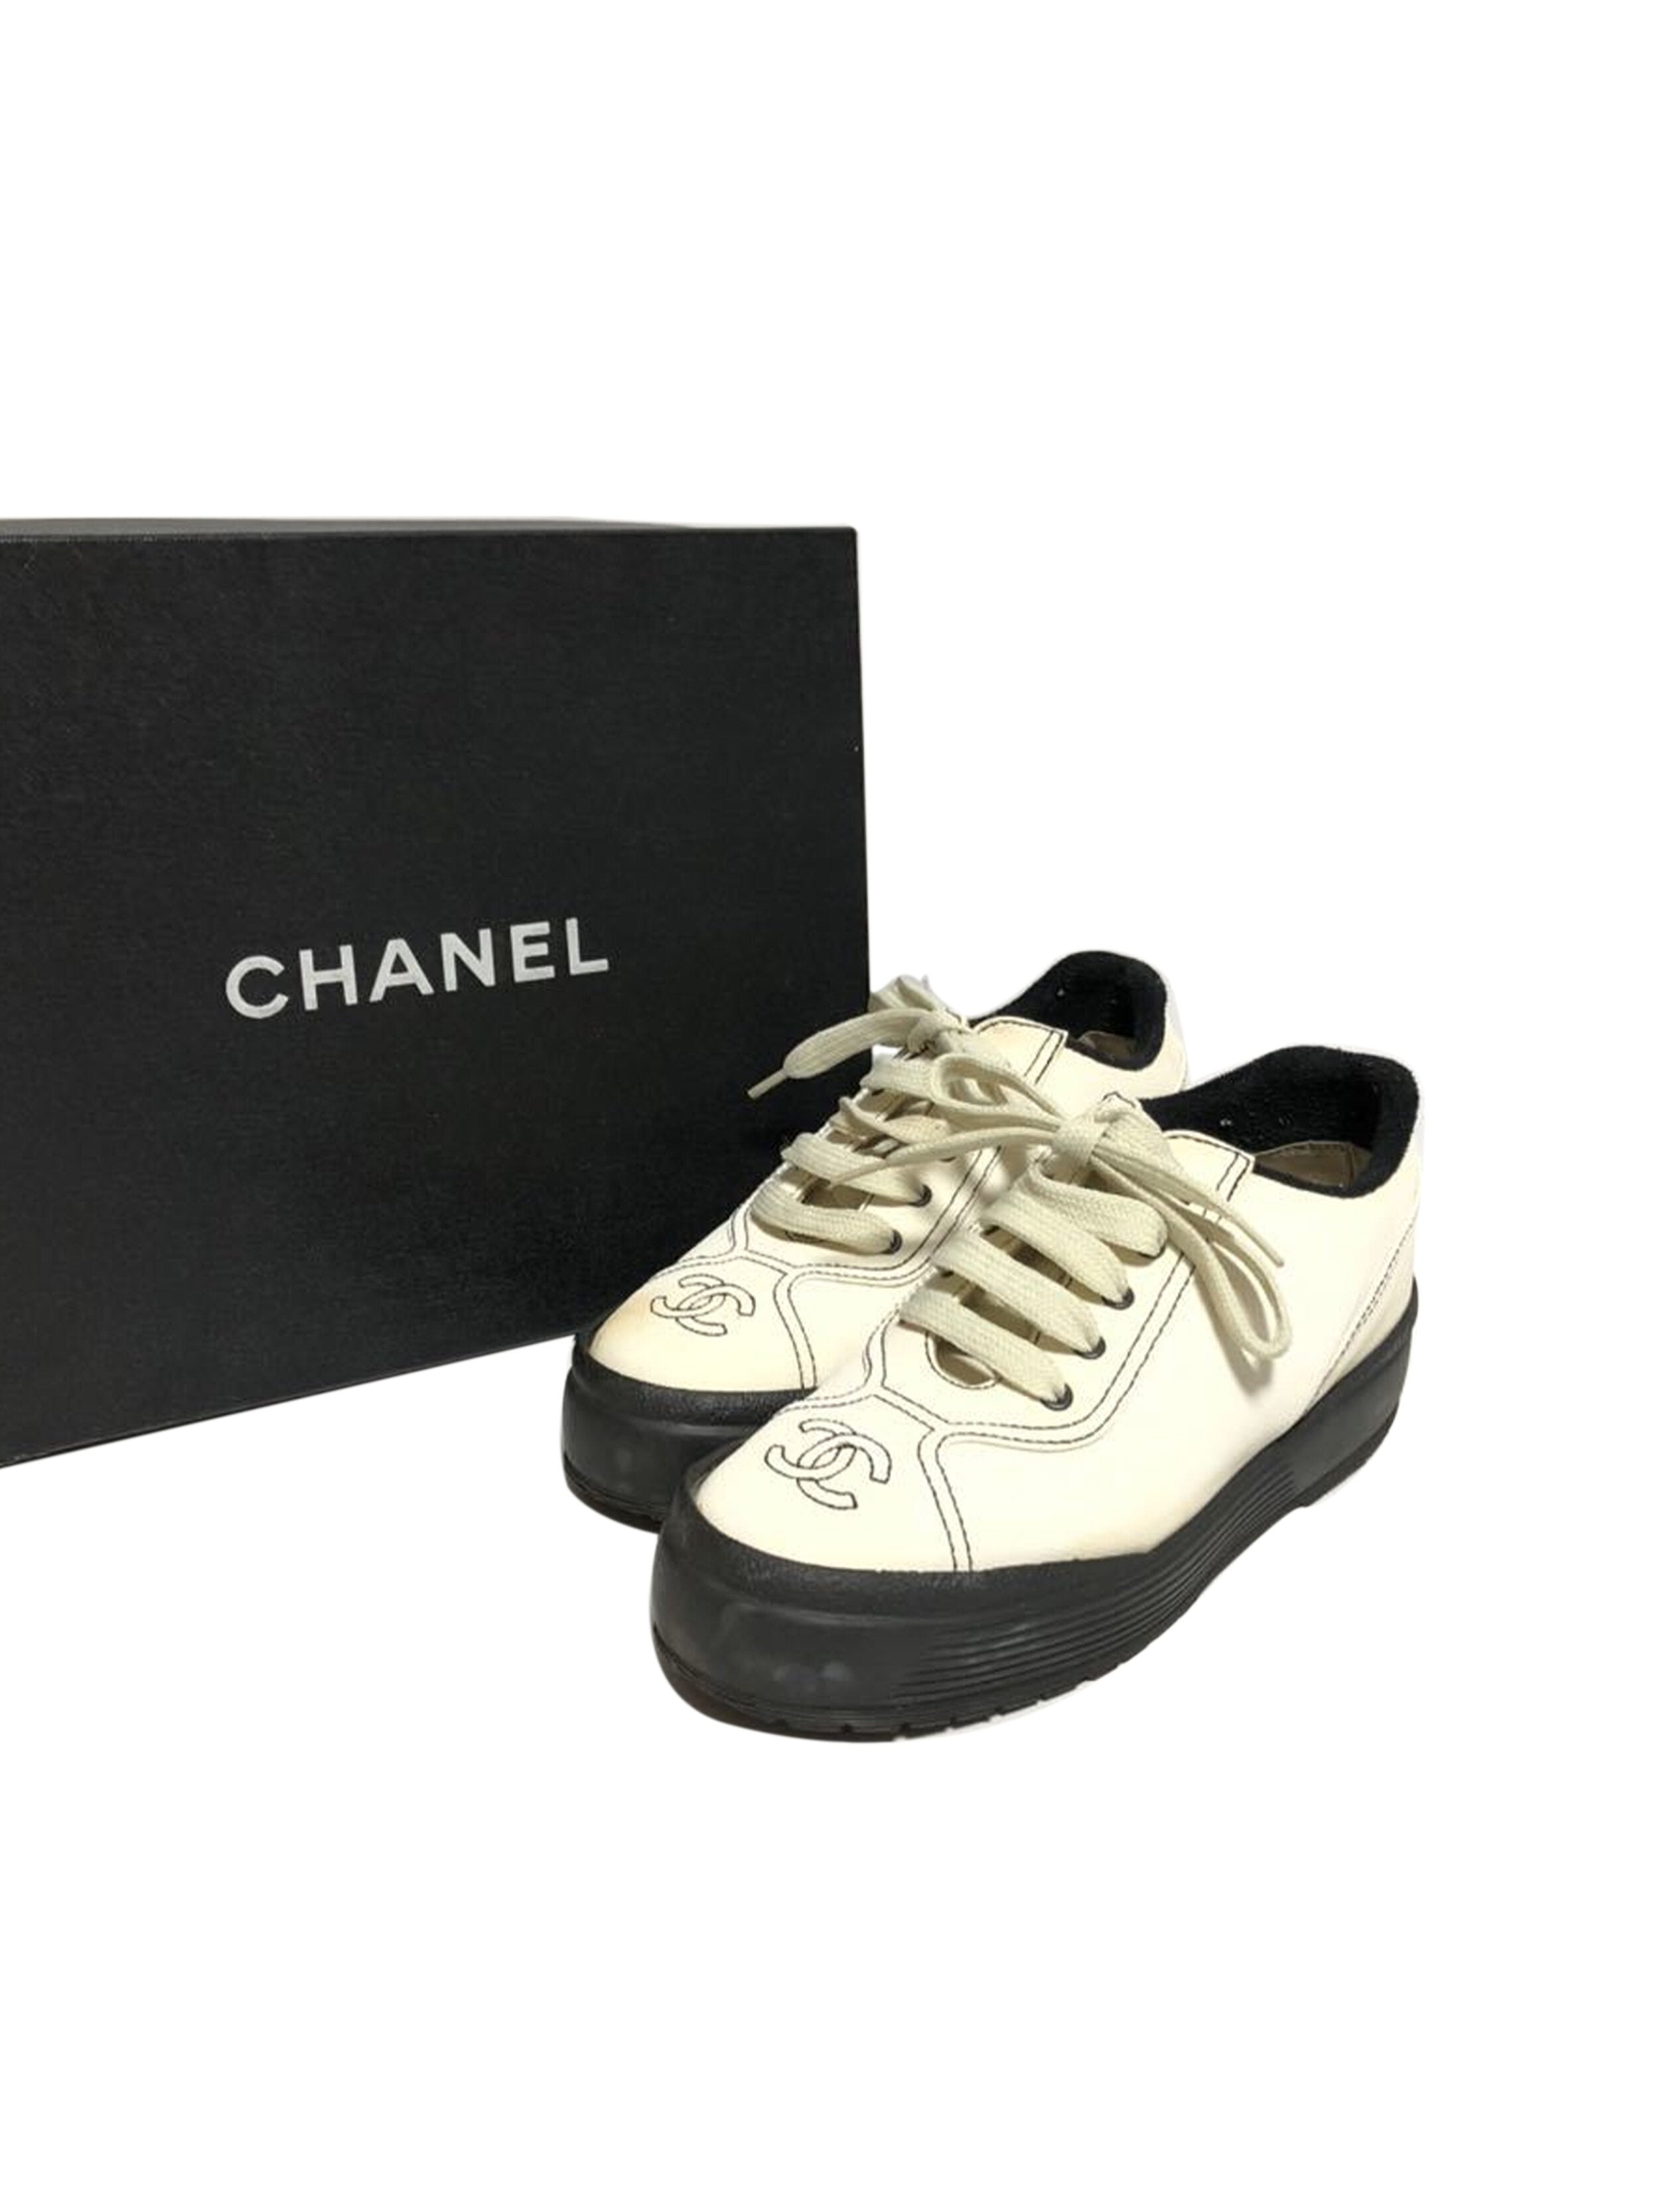 chanel white high top sneakers vintage